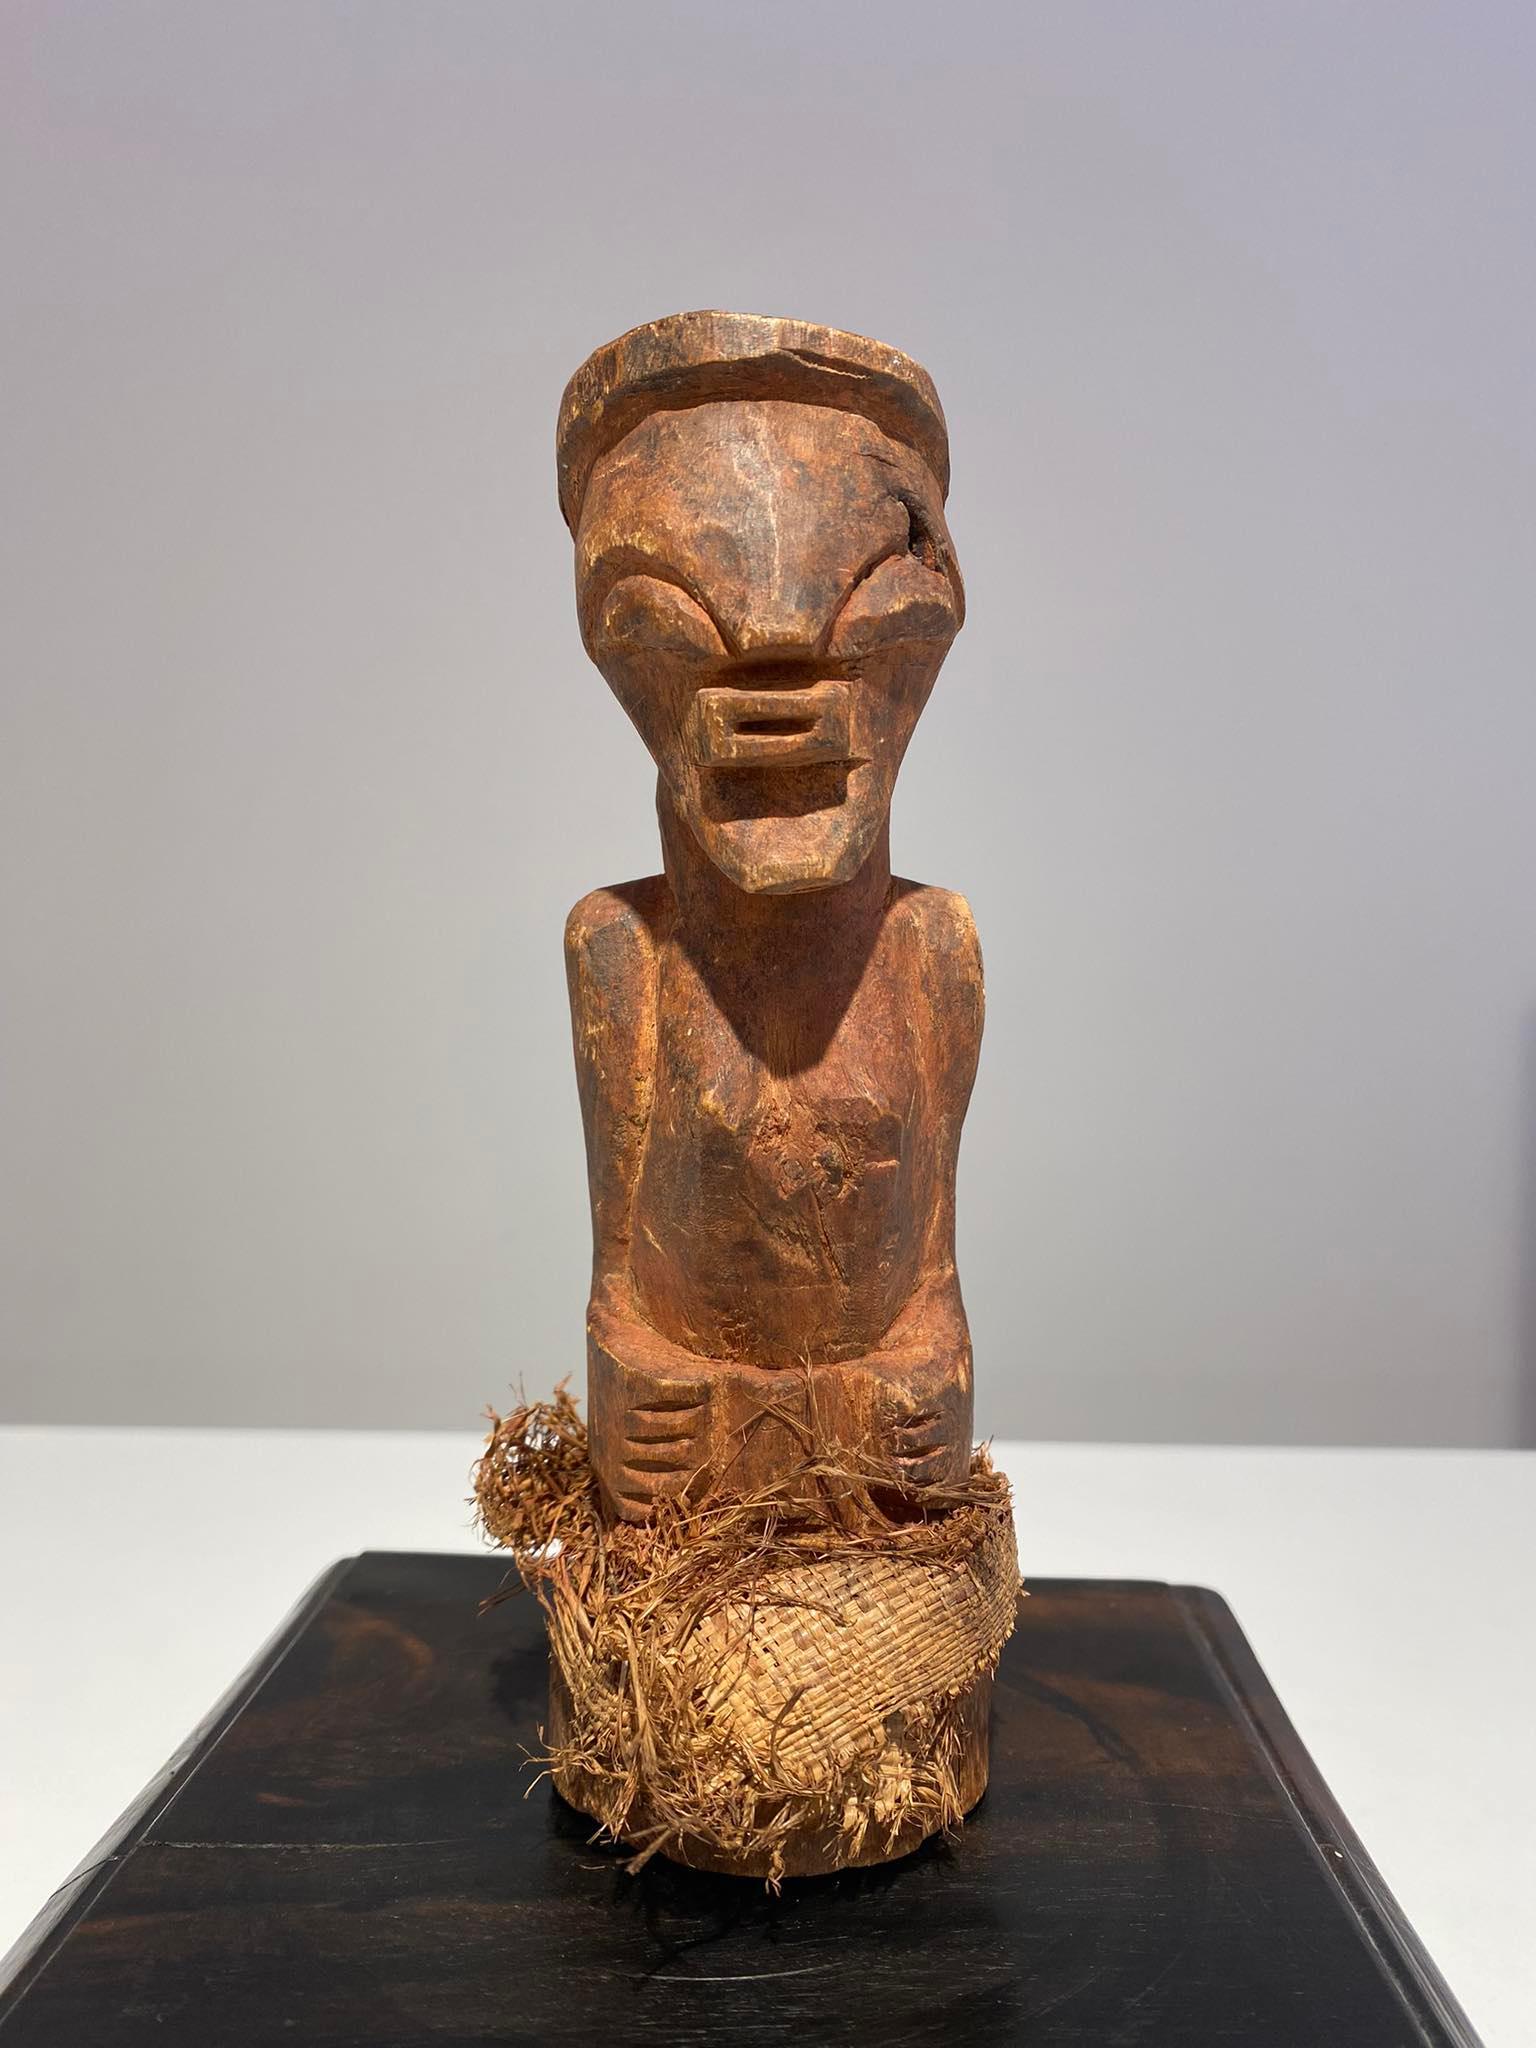 Congolese Statue Nkishi People Songye / Songe - Dr Congo African Art Late 19th century For Sale